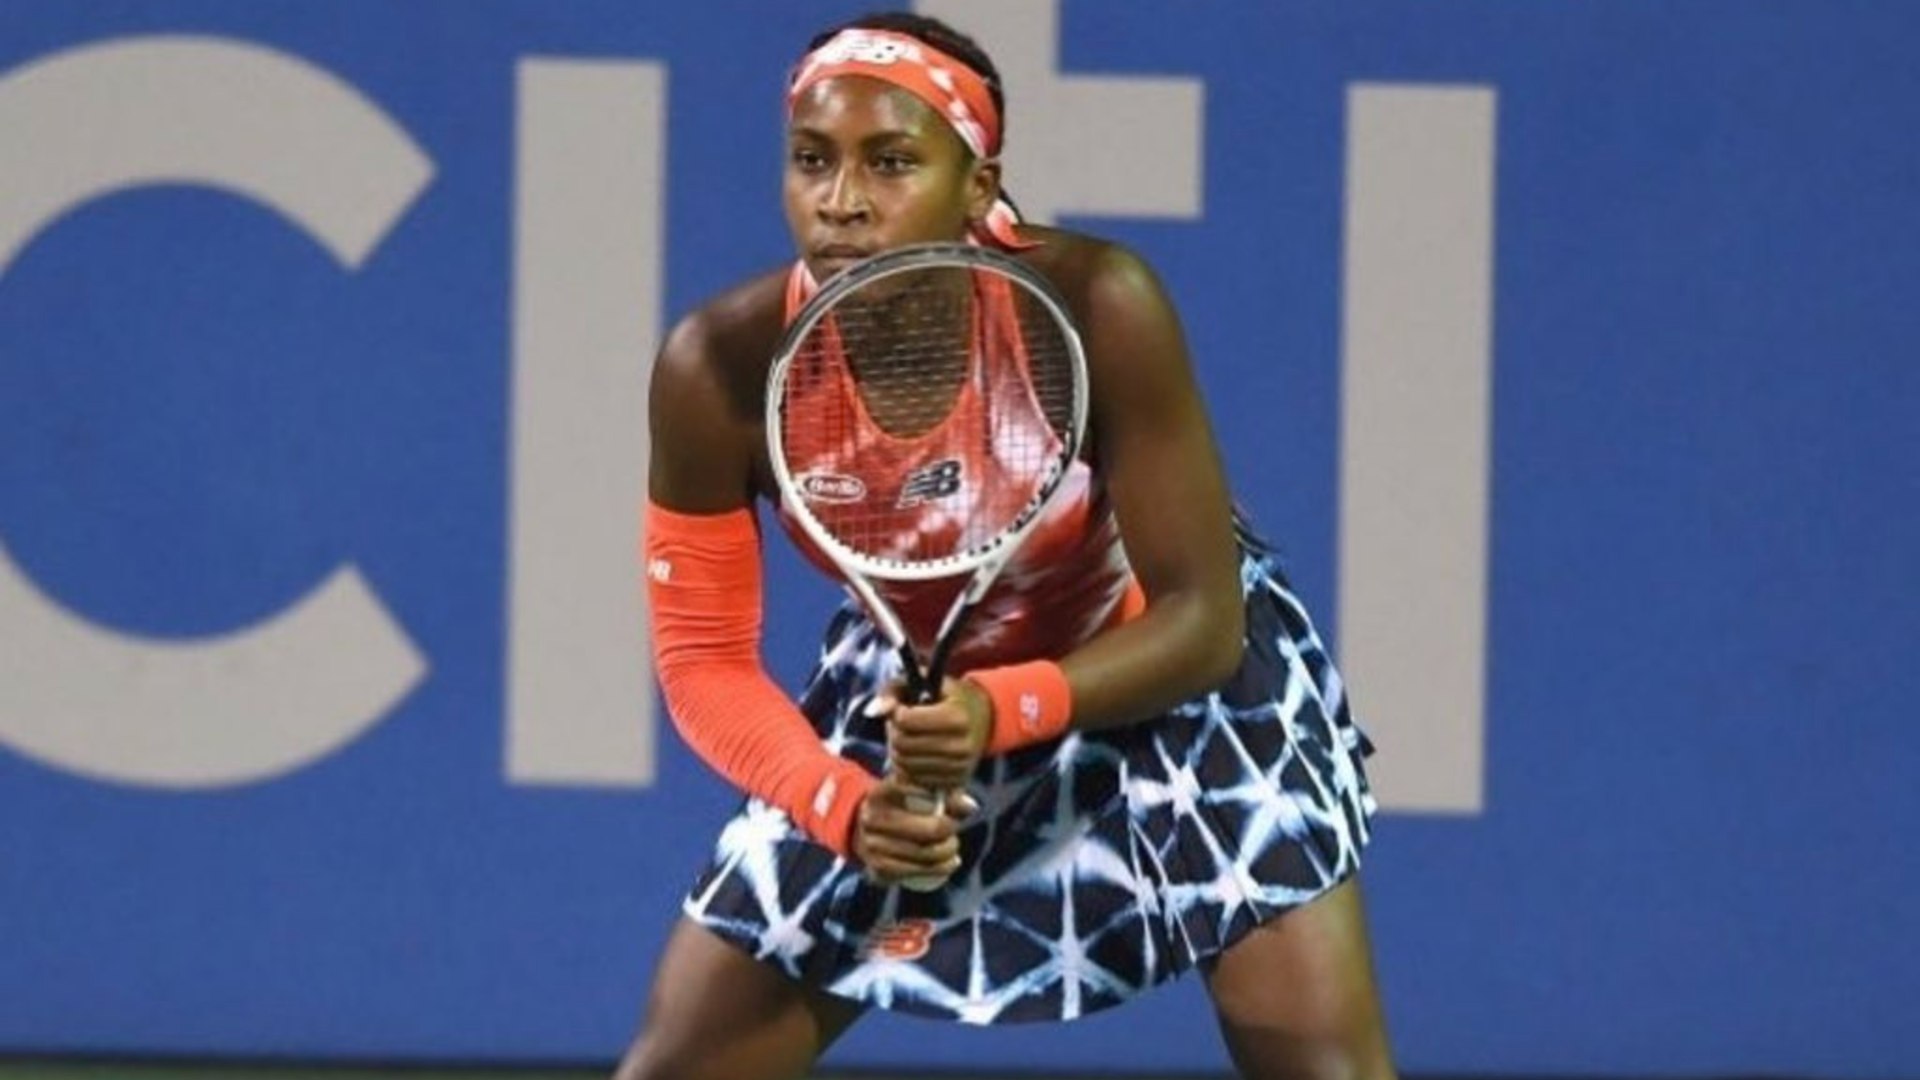 US Open Coco Gauff came from behind to beat Magda Linette 5-7, 6-3, 6-4 in the US Open 2021 first round match; Credit: Twitter/@CocoGauff